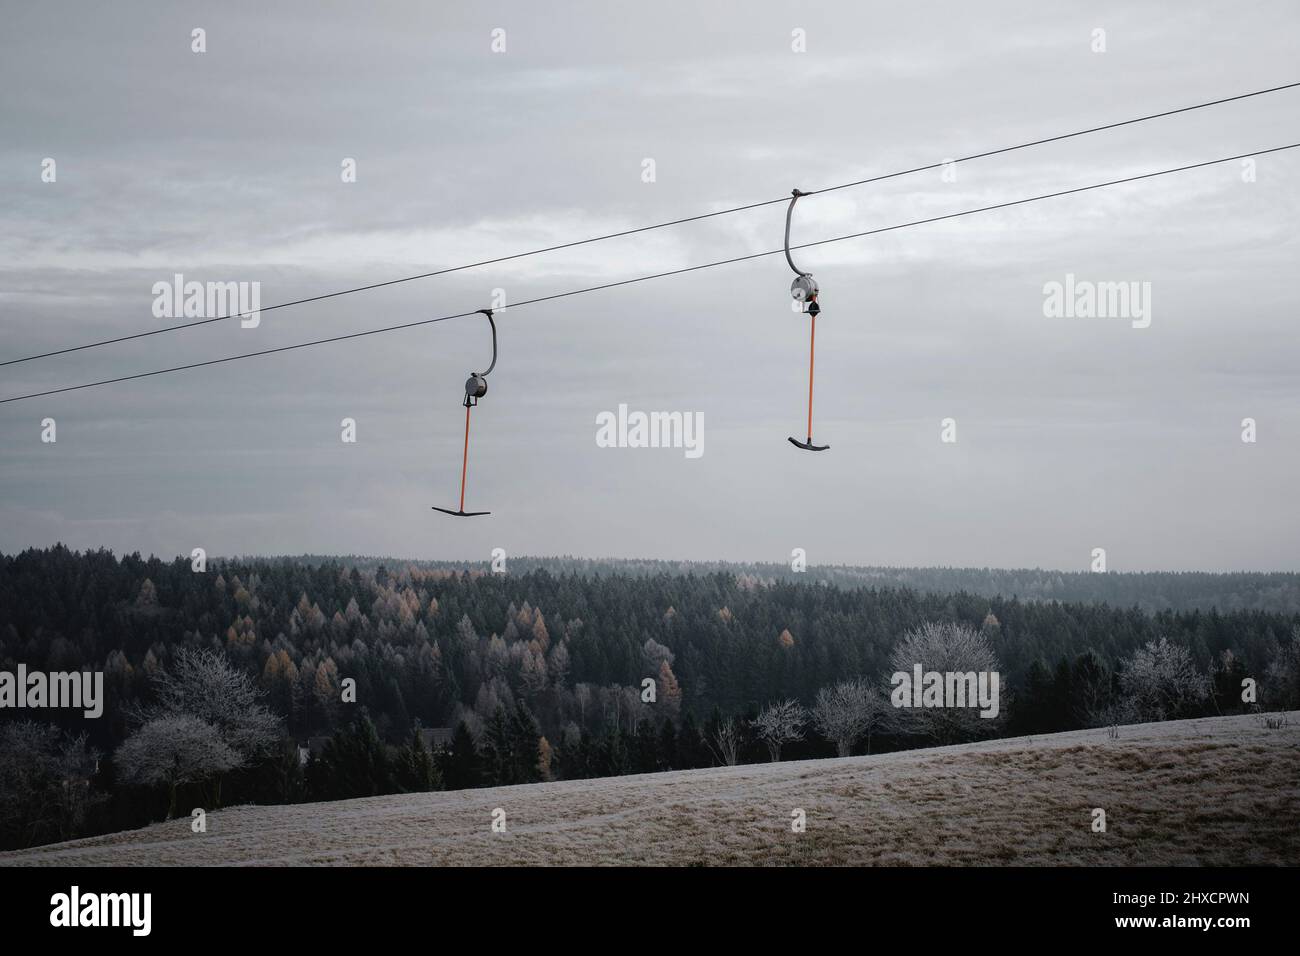 ski lift standing still in the air during fall Stock Photo